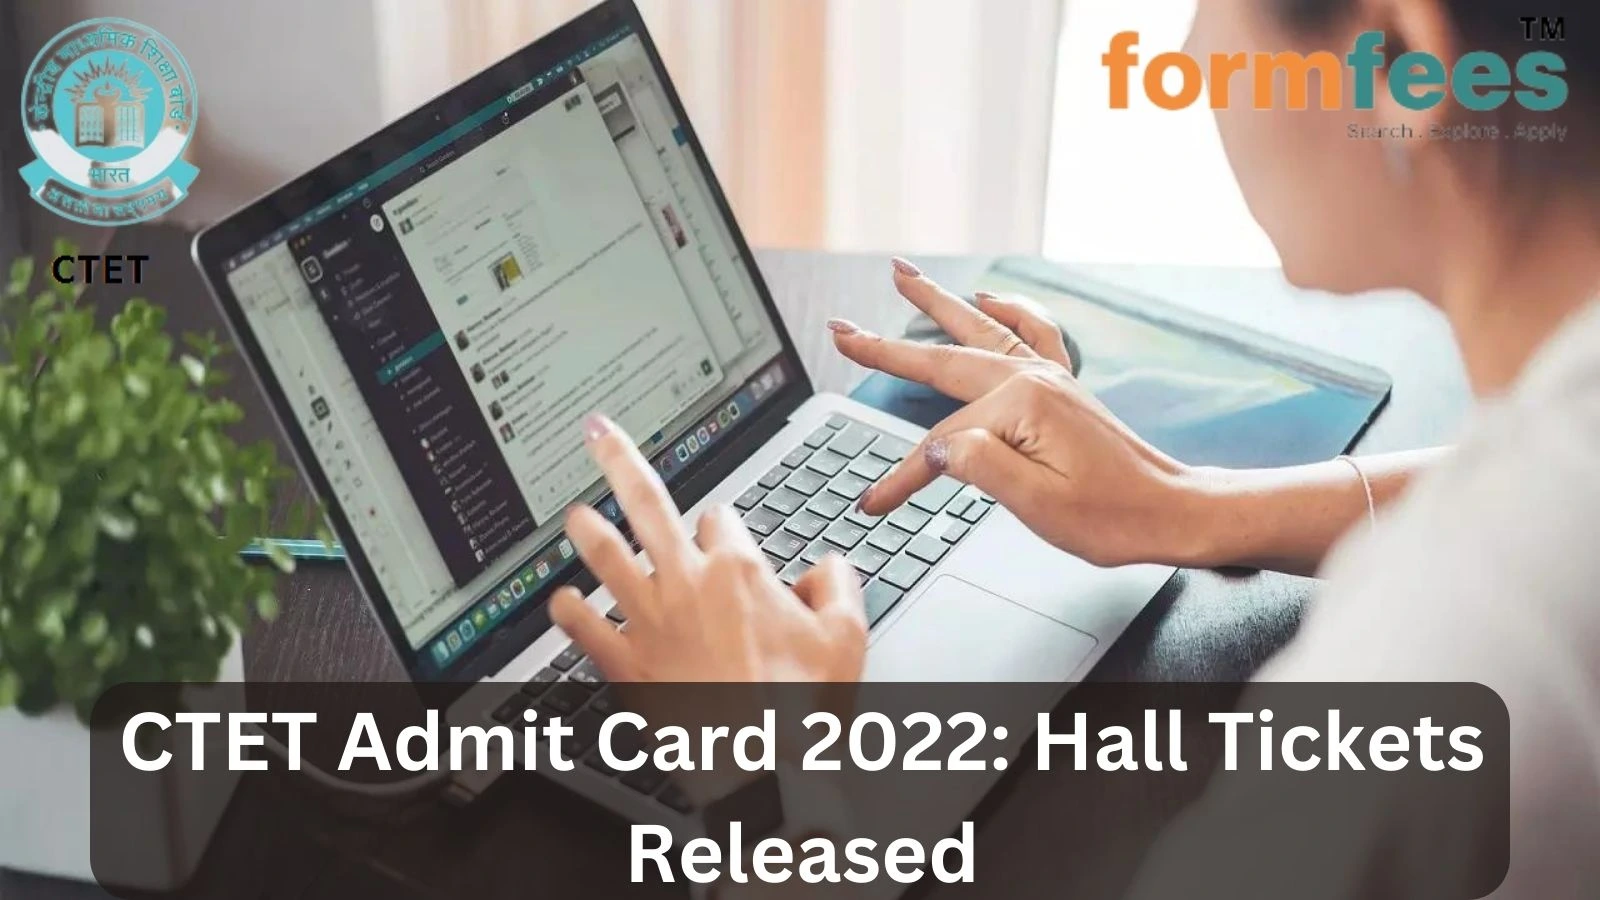 CTET Admit Card 2022: Hall Tickets Released